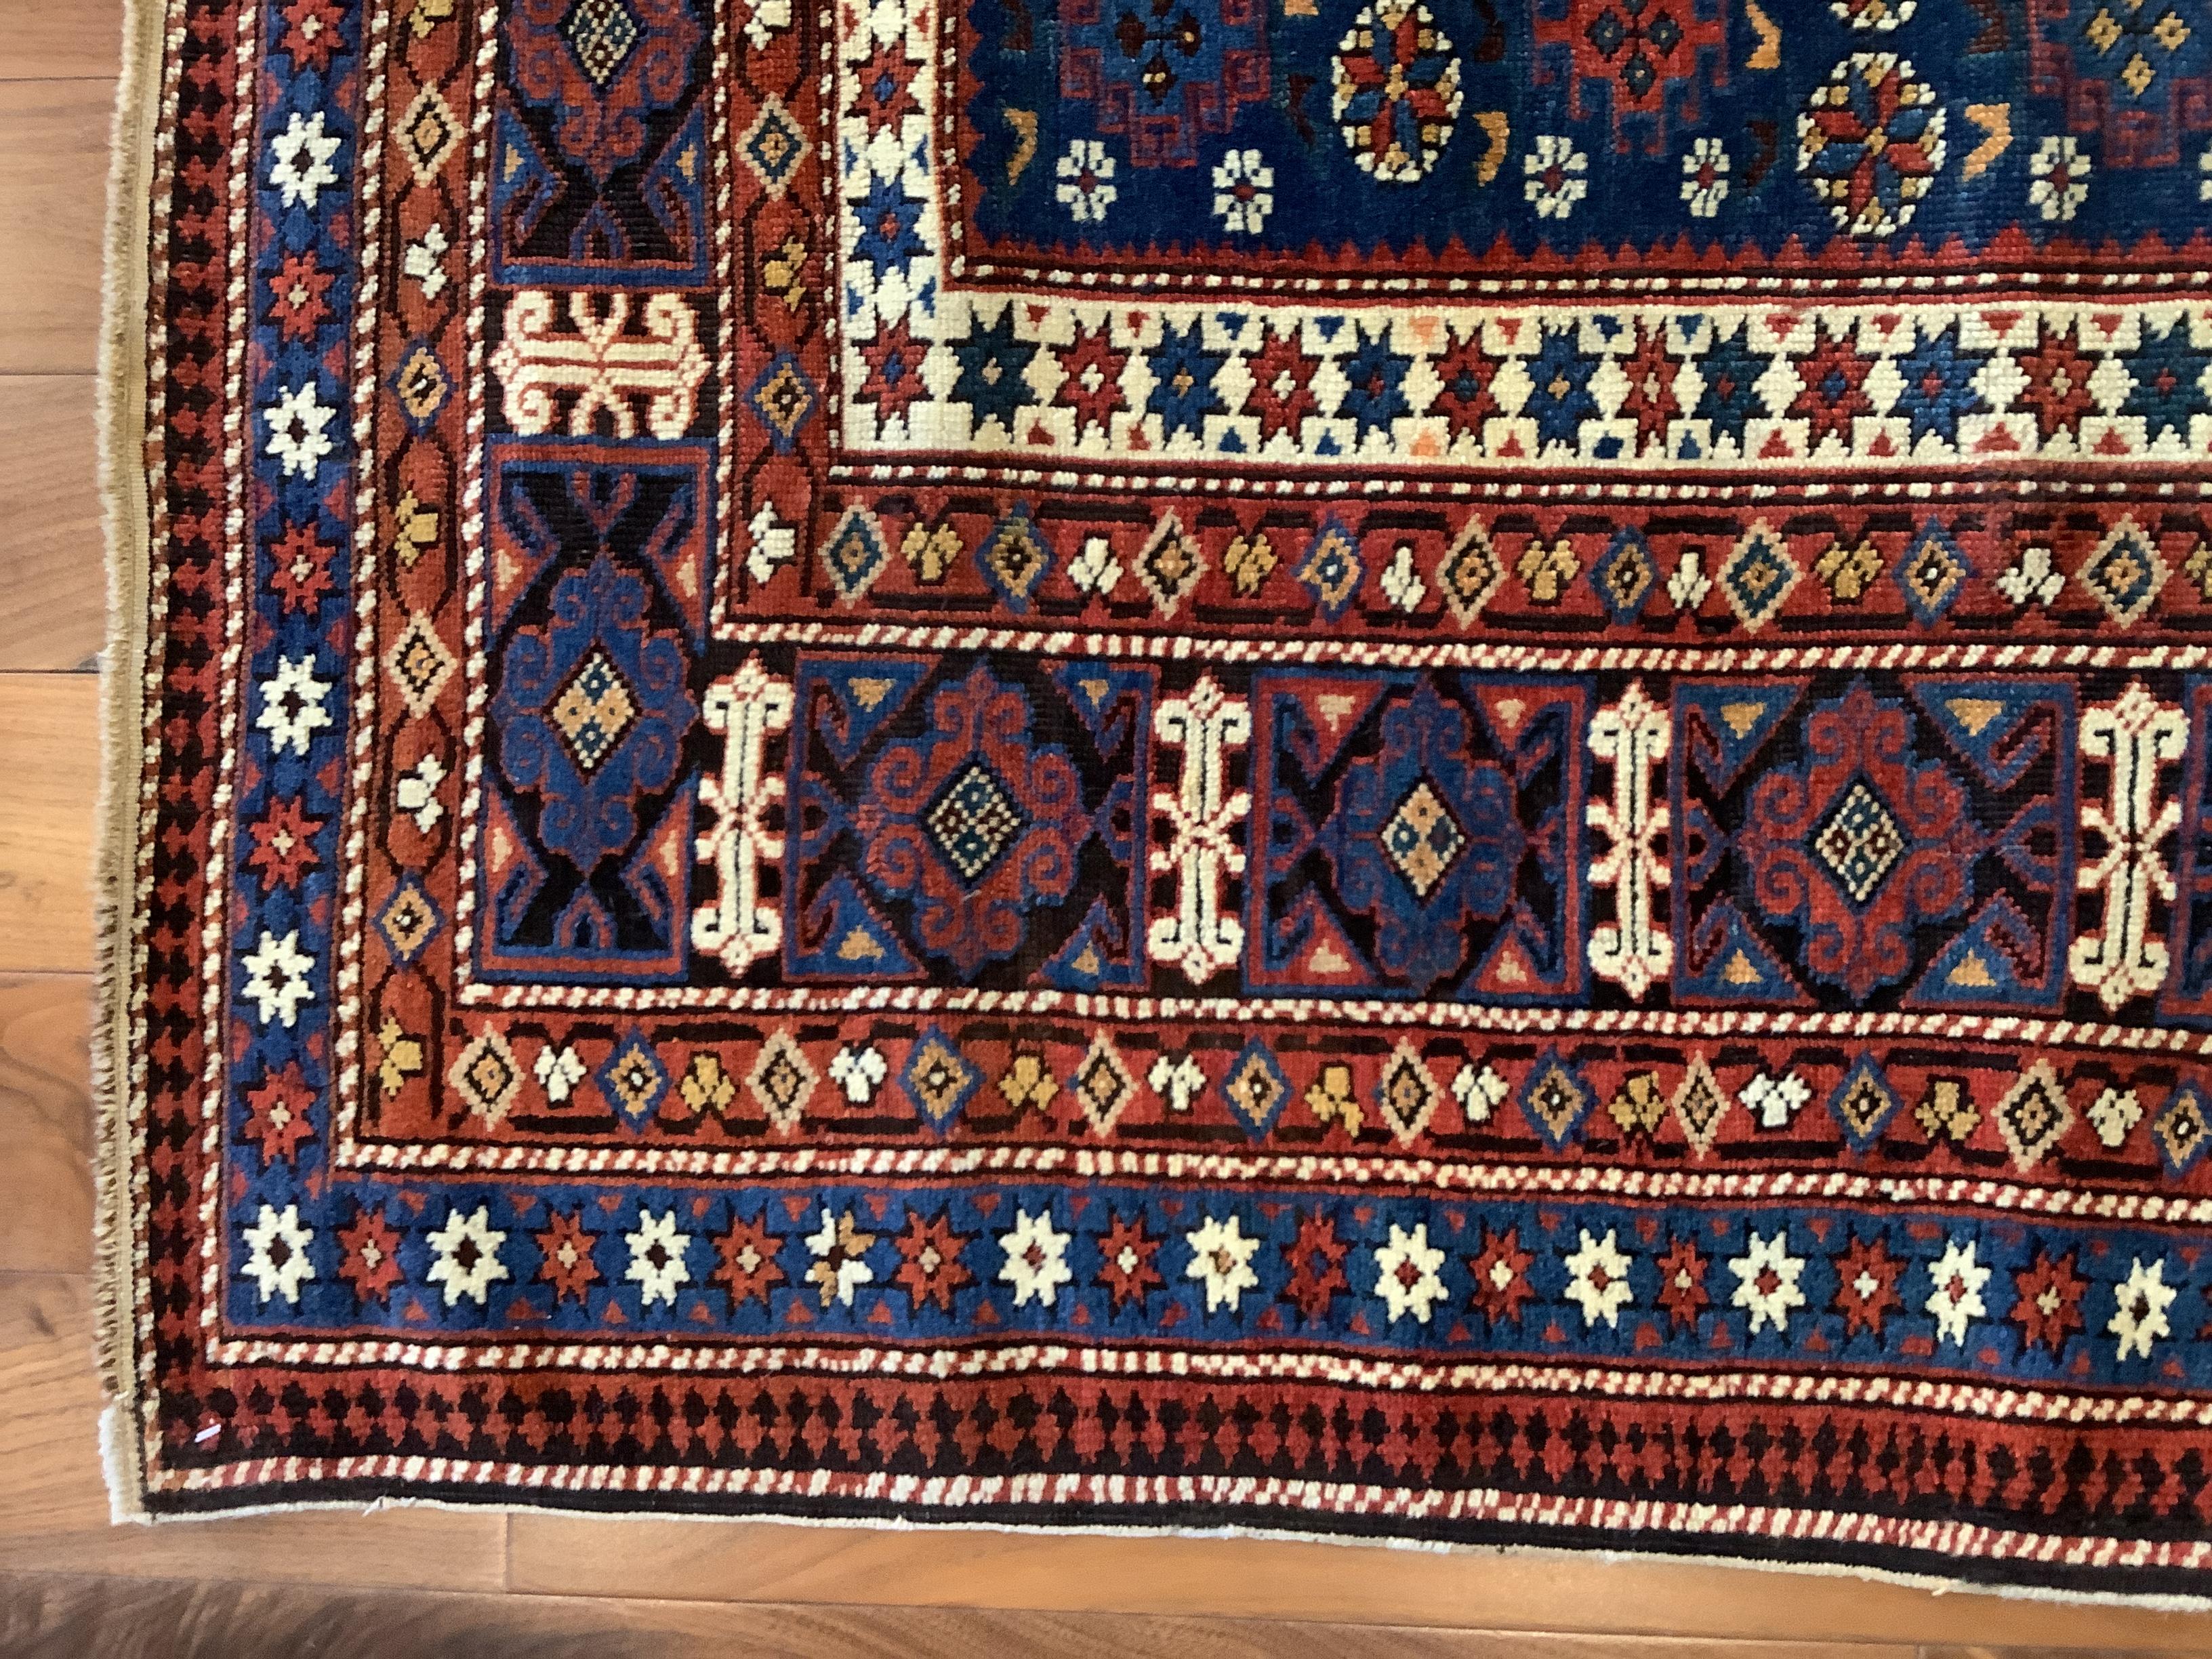 Chi Chi rugs, with their rich variety of small-format geometric motifs which hermetically cover the field and borders, are considered some of the most elaborate Caucasian weavings. The midnight blue field of this piece is filled with an immaculately